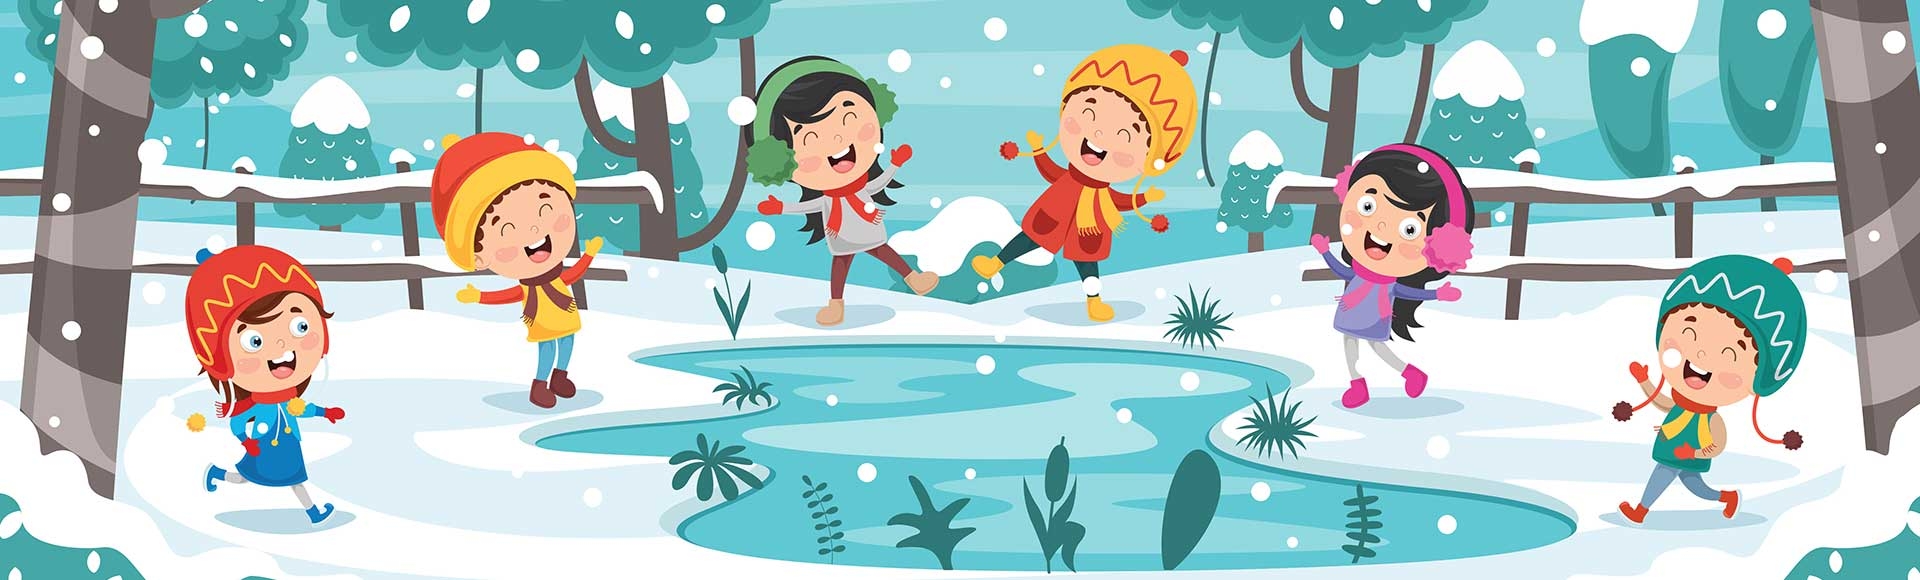 Illustration of kids playing in snow